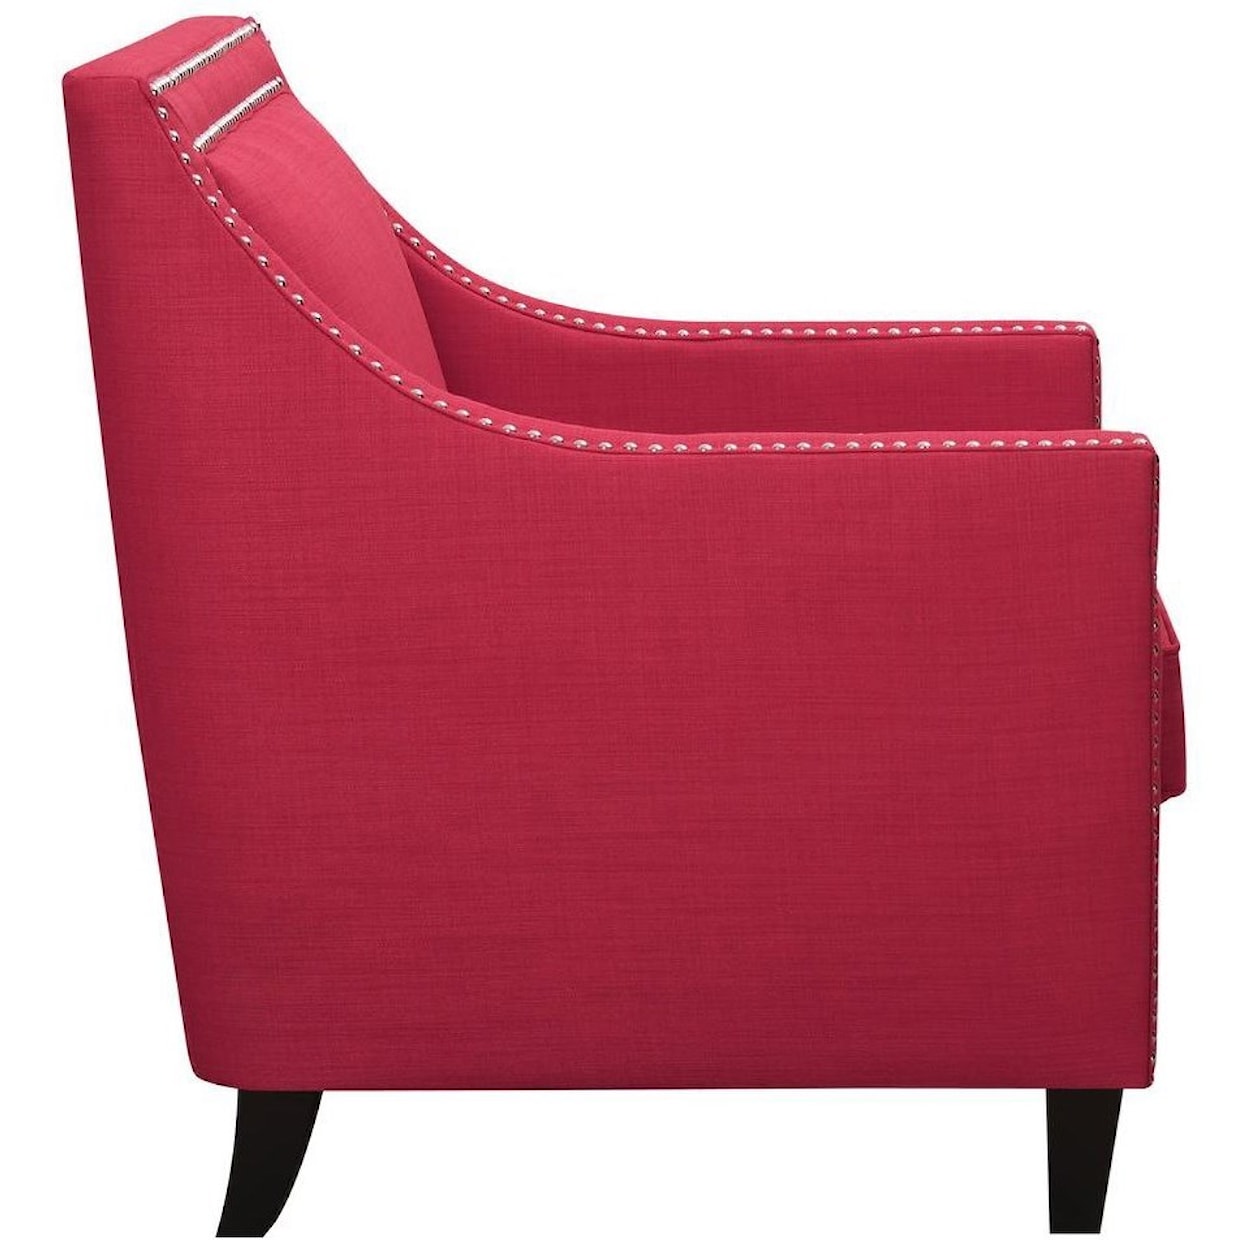 Elements Erica Accent Chair